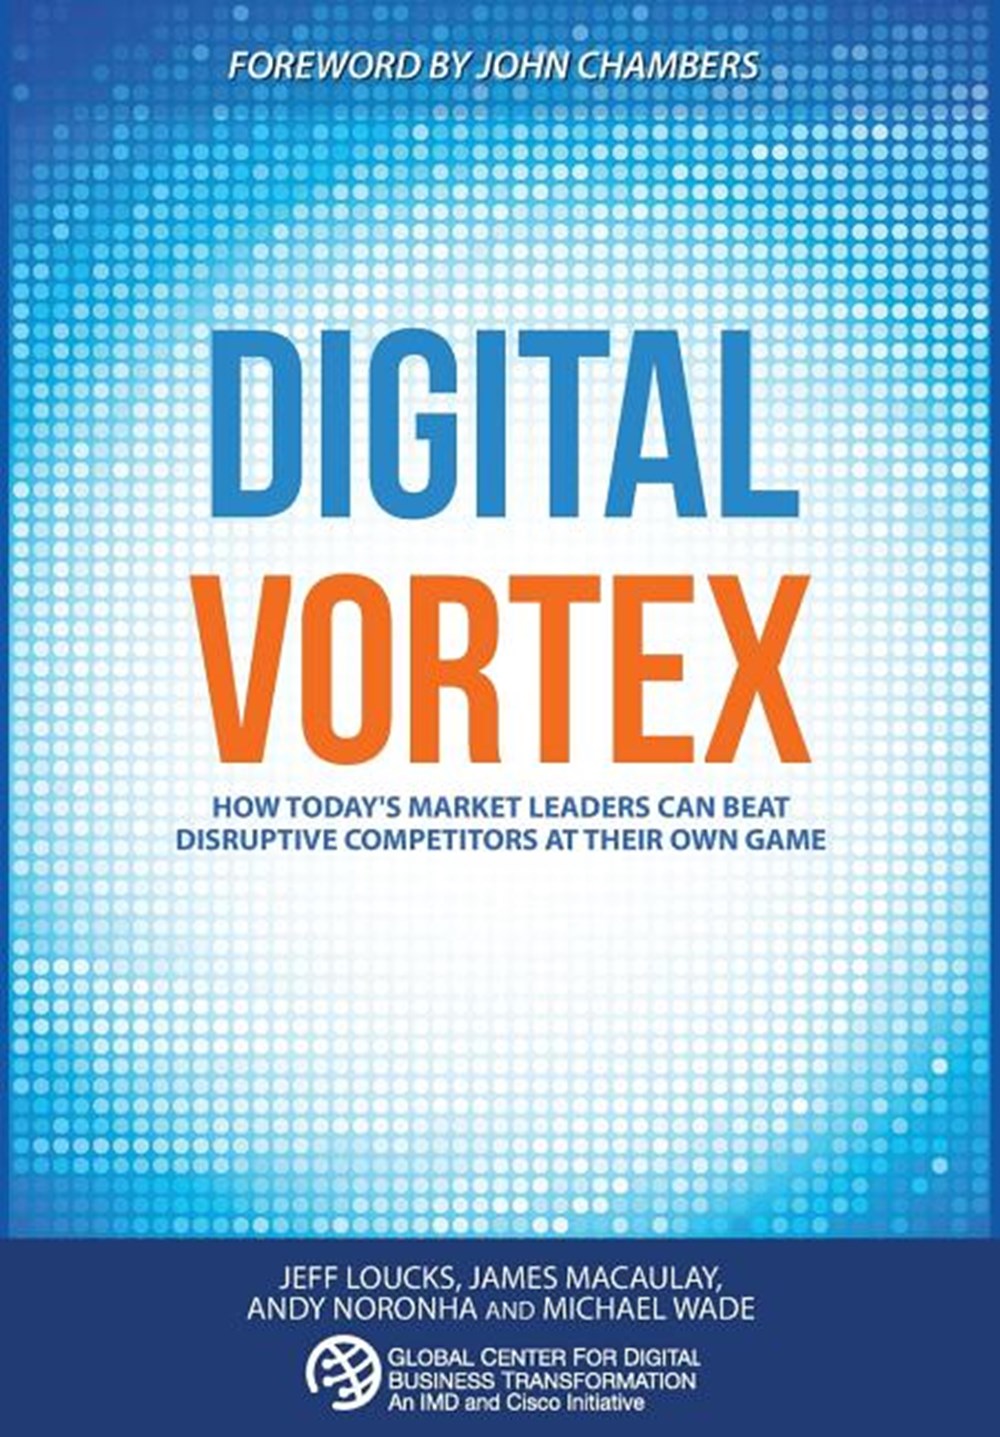 Digital Vortex How Today's Market Leaders Can Beat Disruptive Competitors at Their Own Game